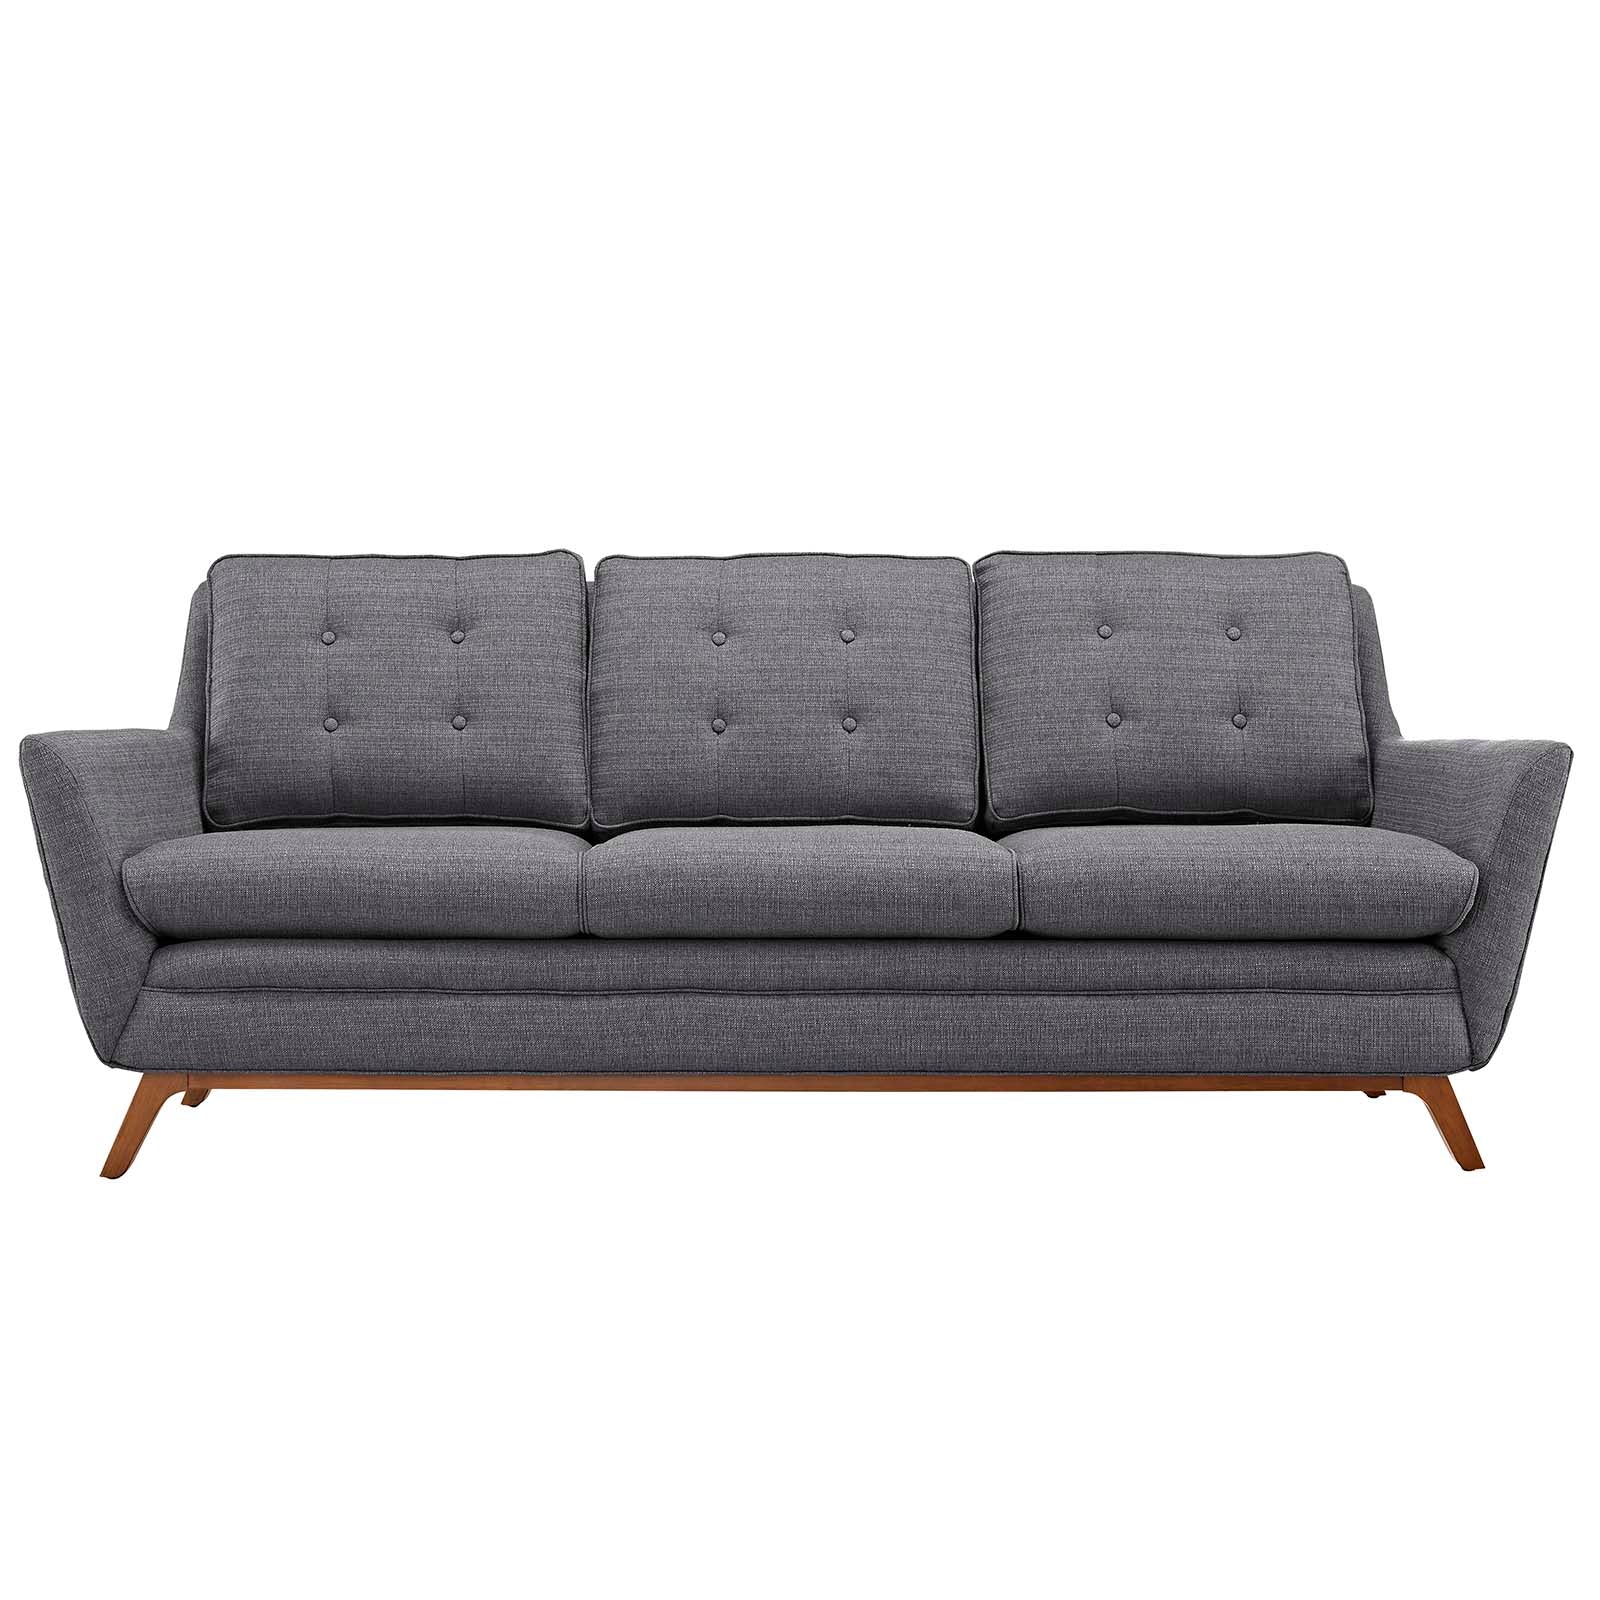 Modway Sofas & Couches - Beguile Upholstered Fabric Sofa Gray